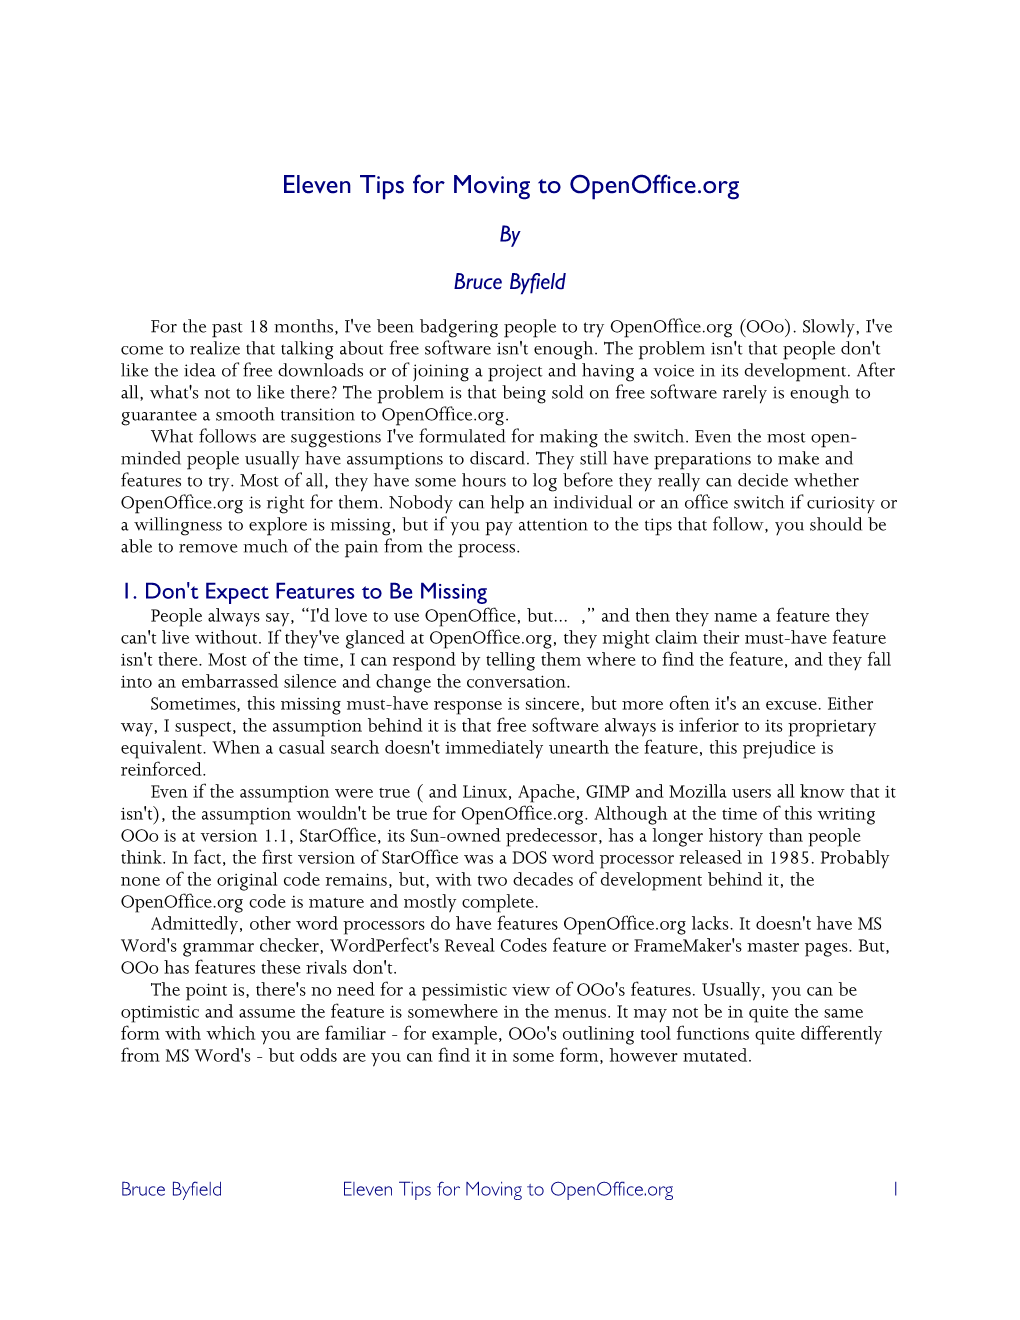 Eleven Tips for Moving to Openoffice.Org